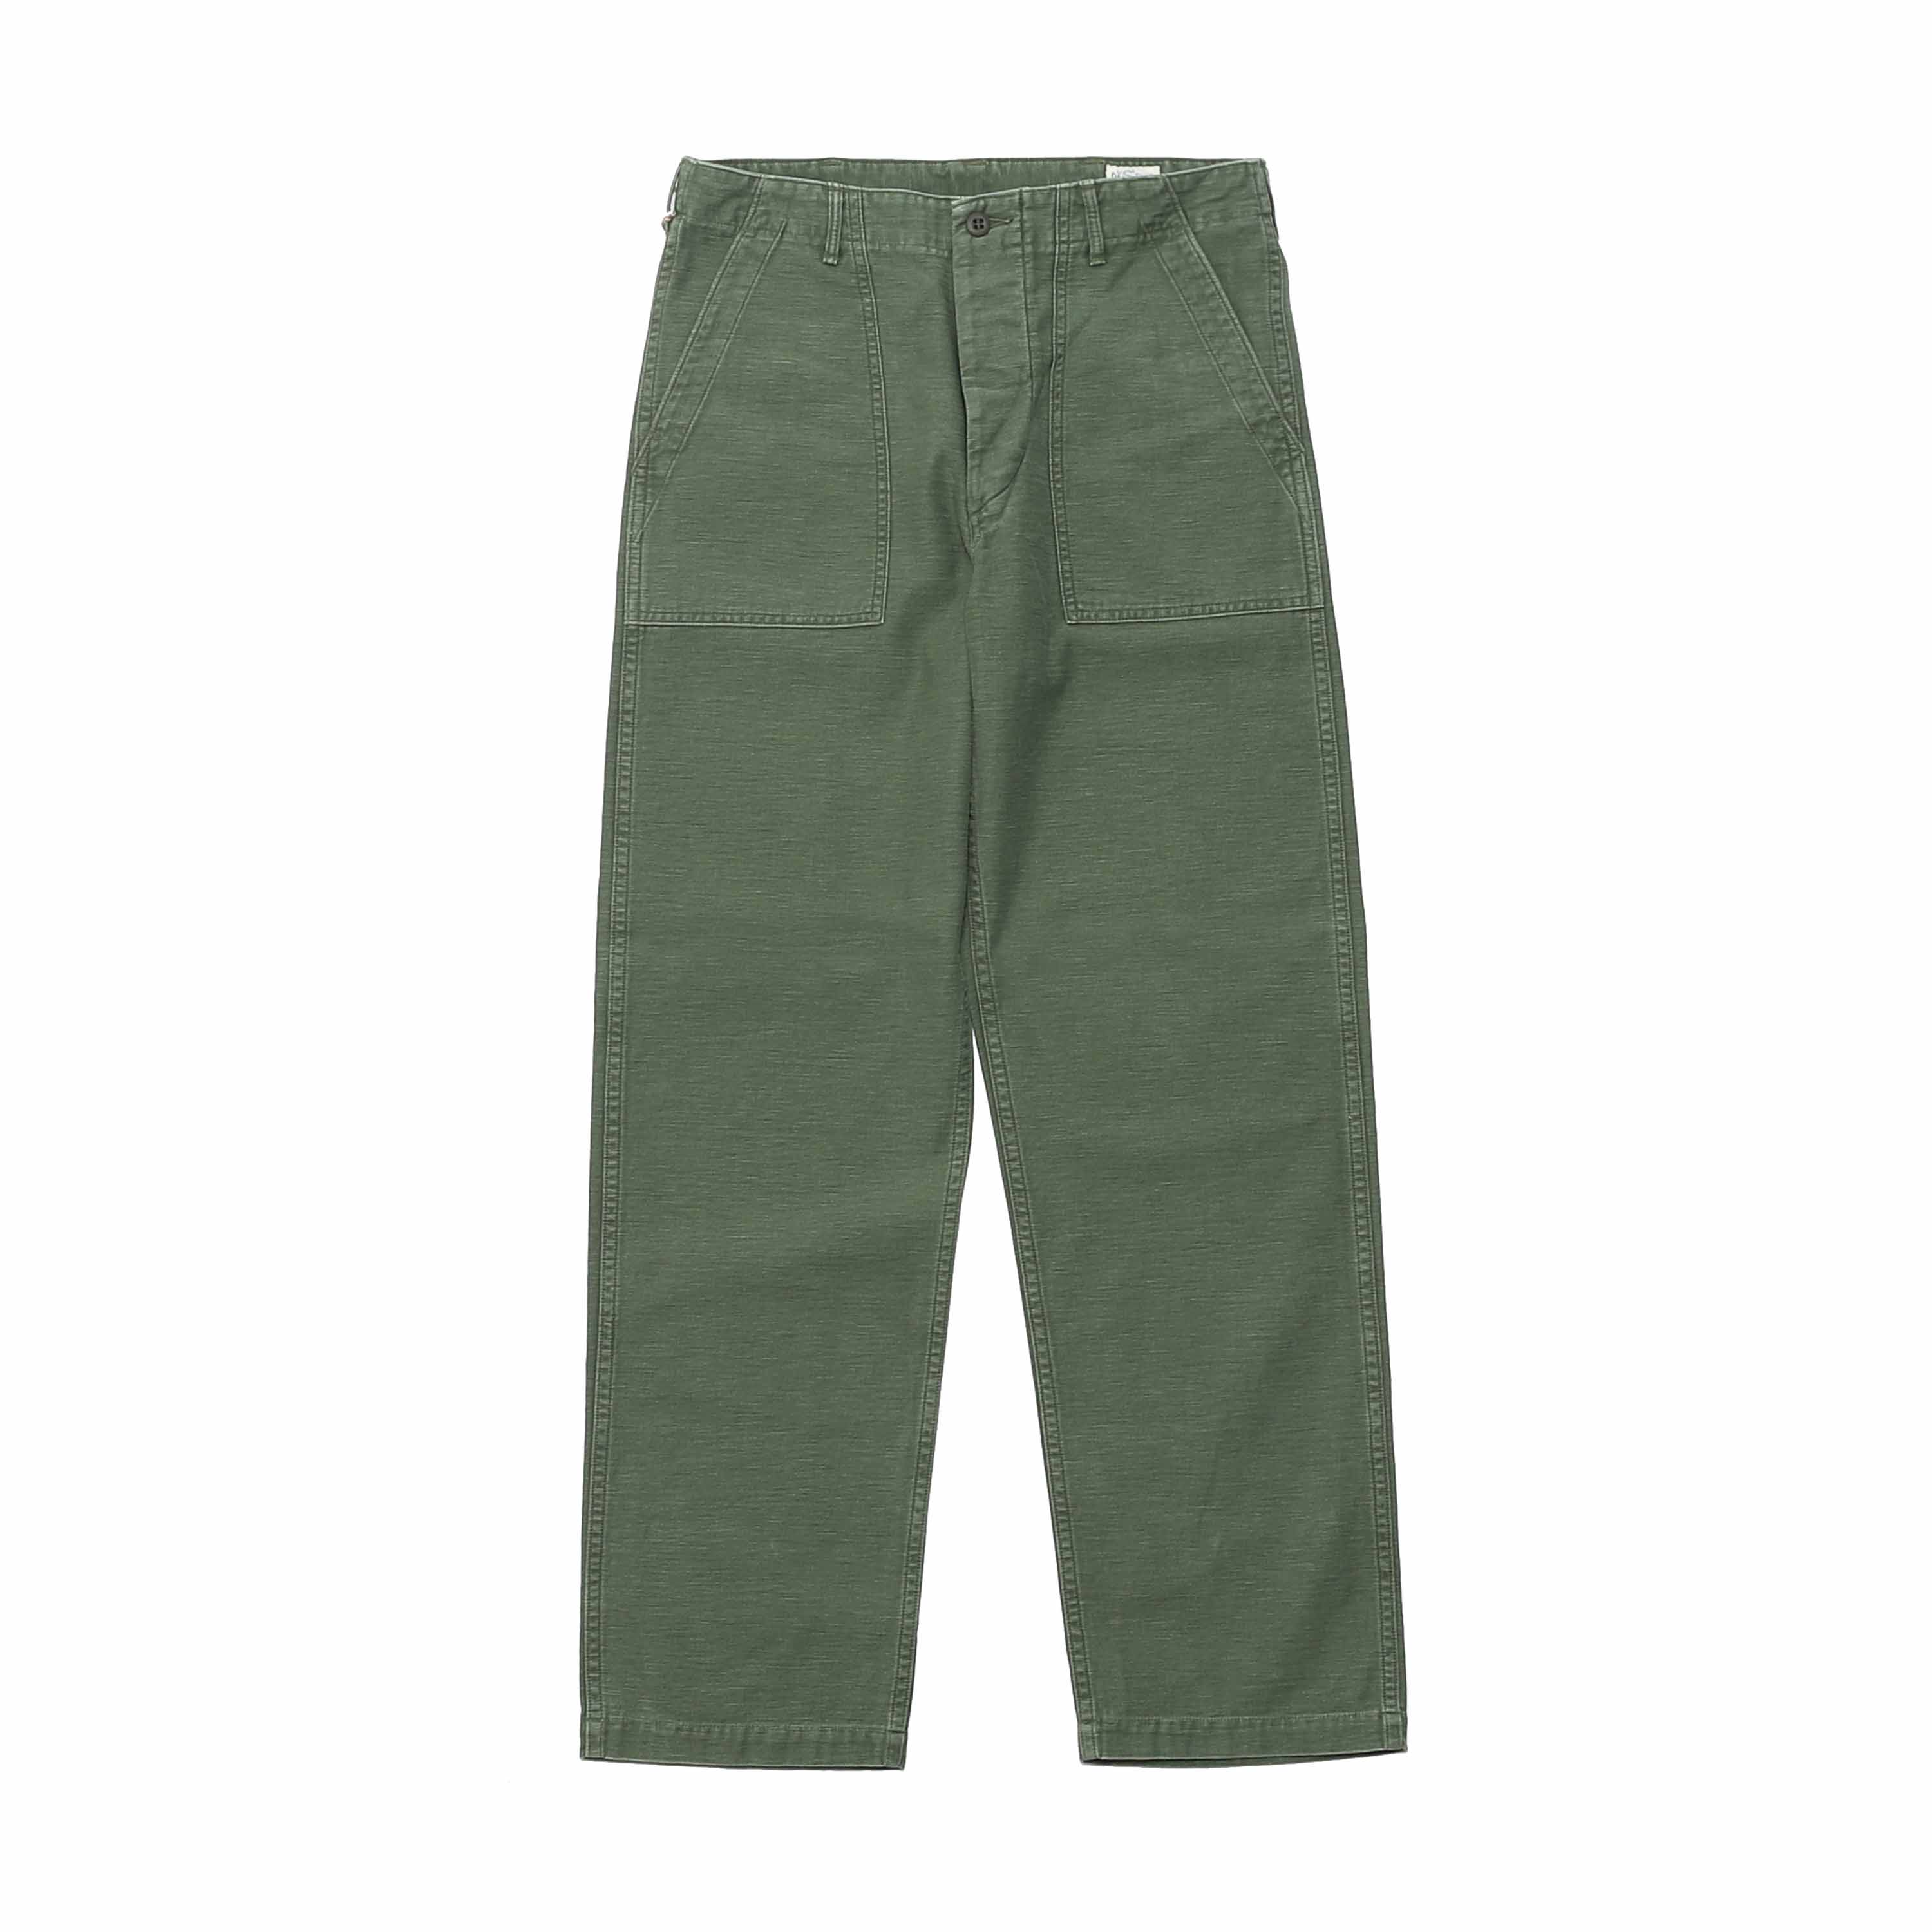 US ARMY FATIGUE PANTS (REGULAR FIT) - GREEN USED